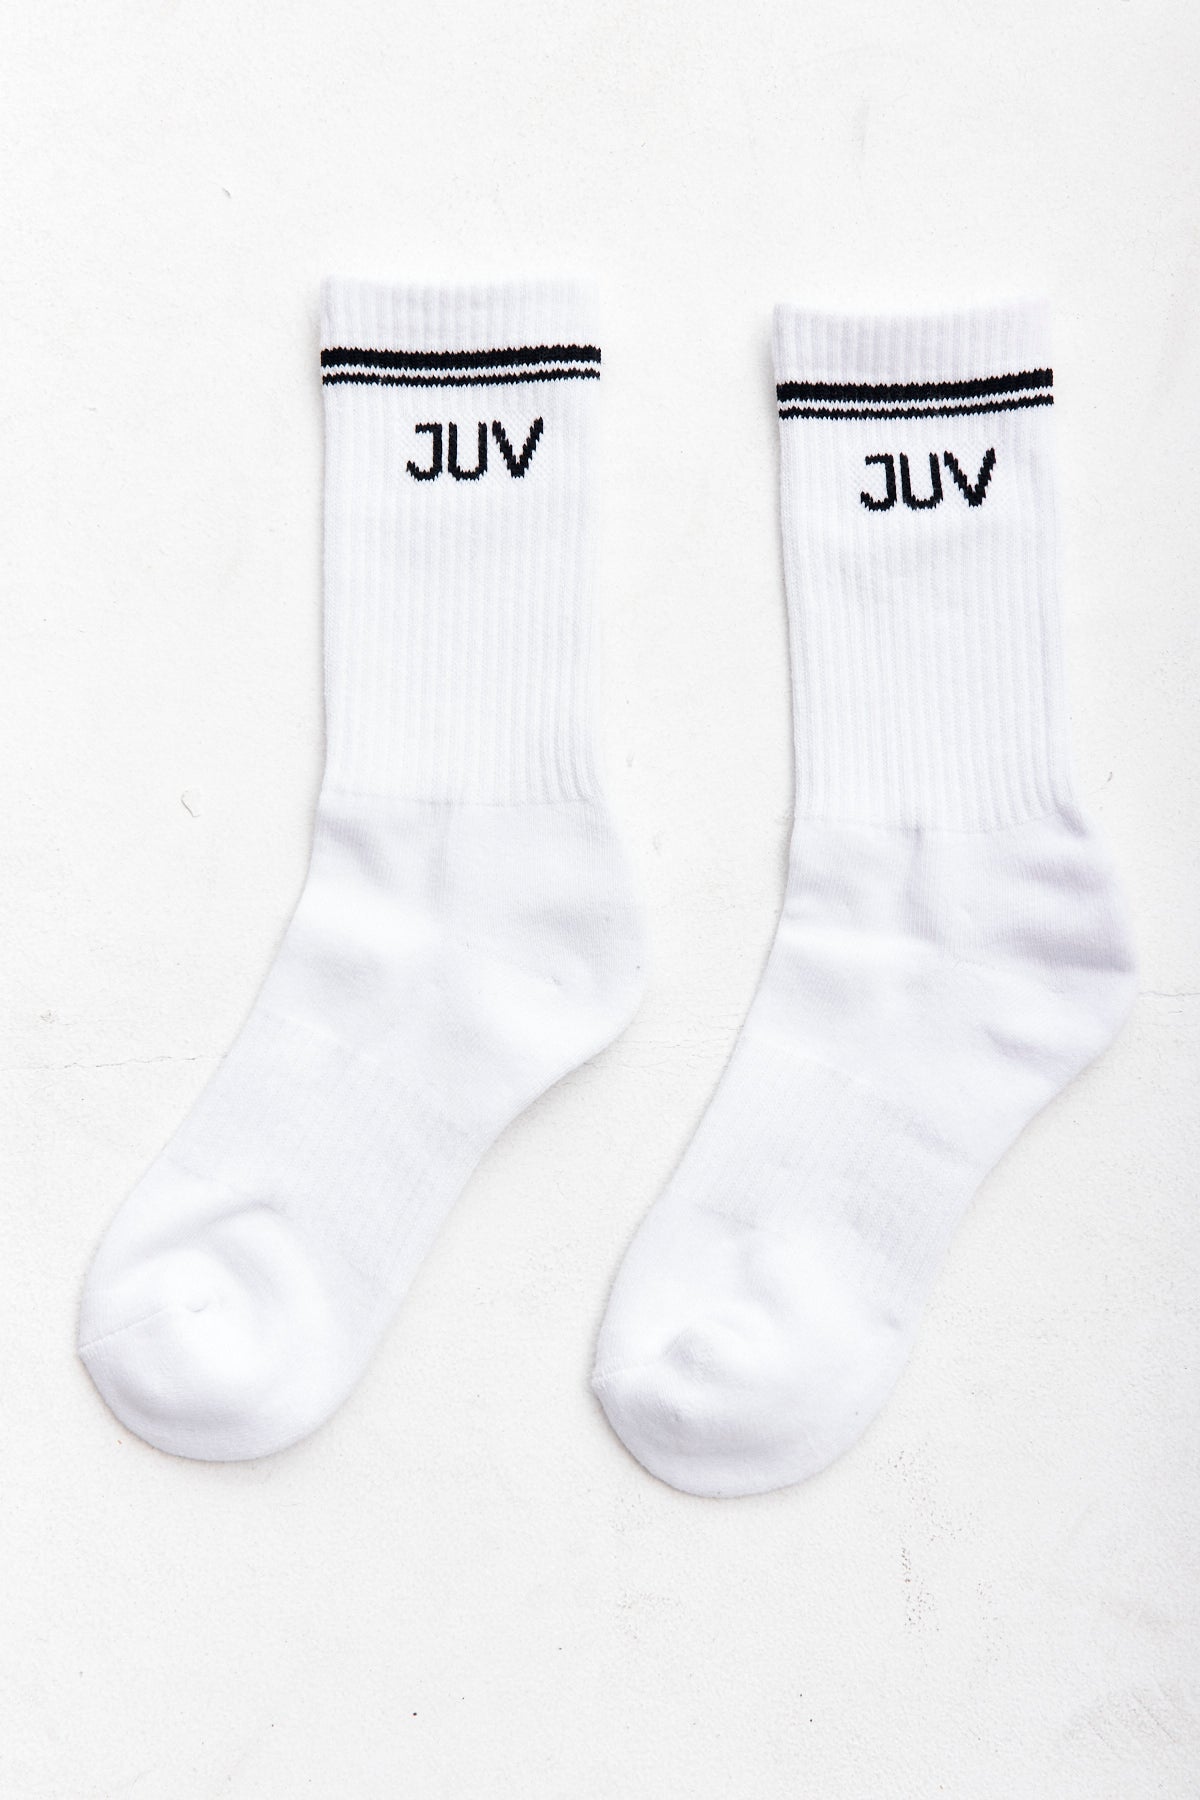 JUV crew socks in white, close up view of the socks in a white background.